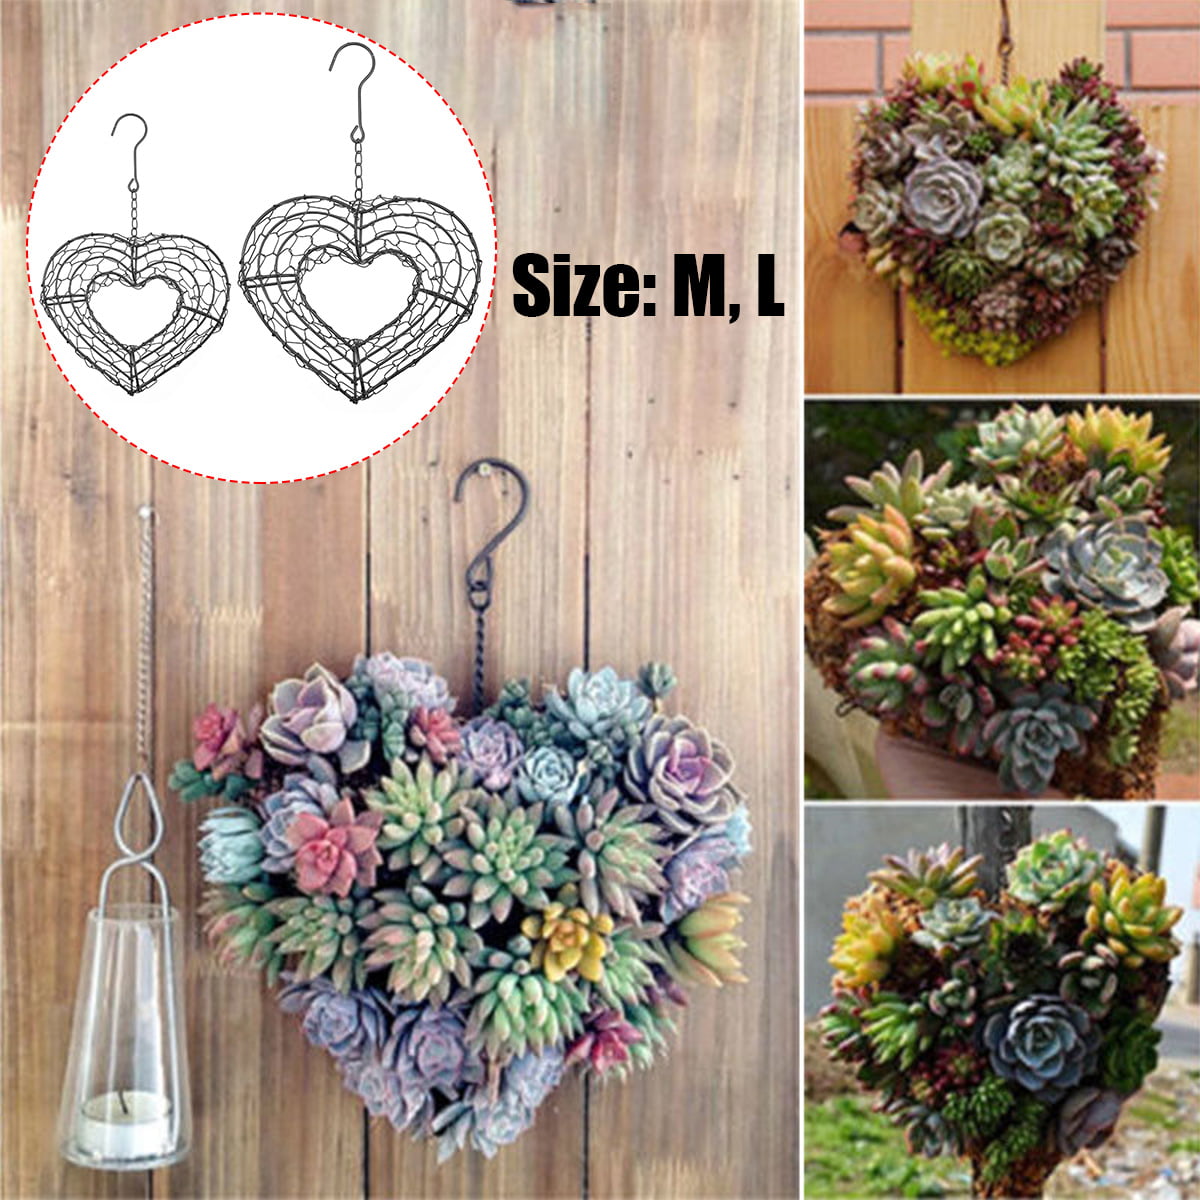 Succulent Pot Decor Basket Firlar Round Wire Wreath Frame Hanging Flower Stand Hanging Wall Plant Holder Moon Shaped Metal Hanging Planter Plant Holder Flower Hanging Basket